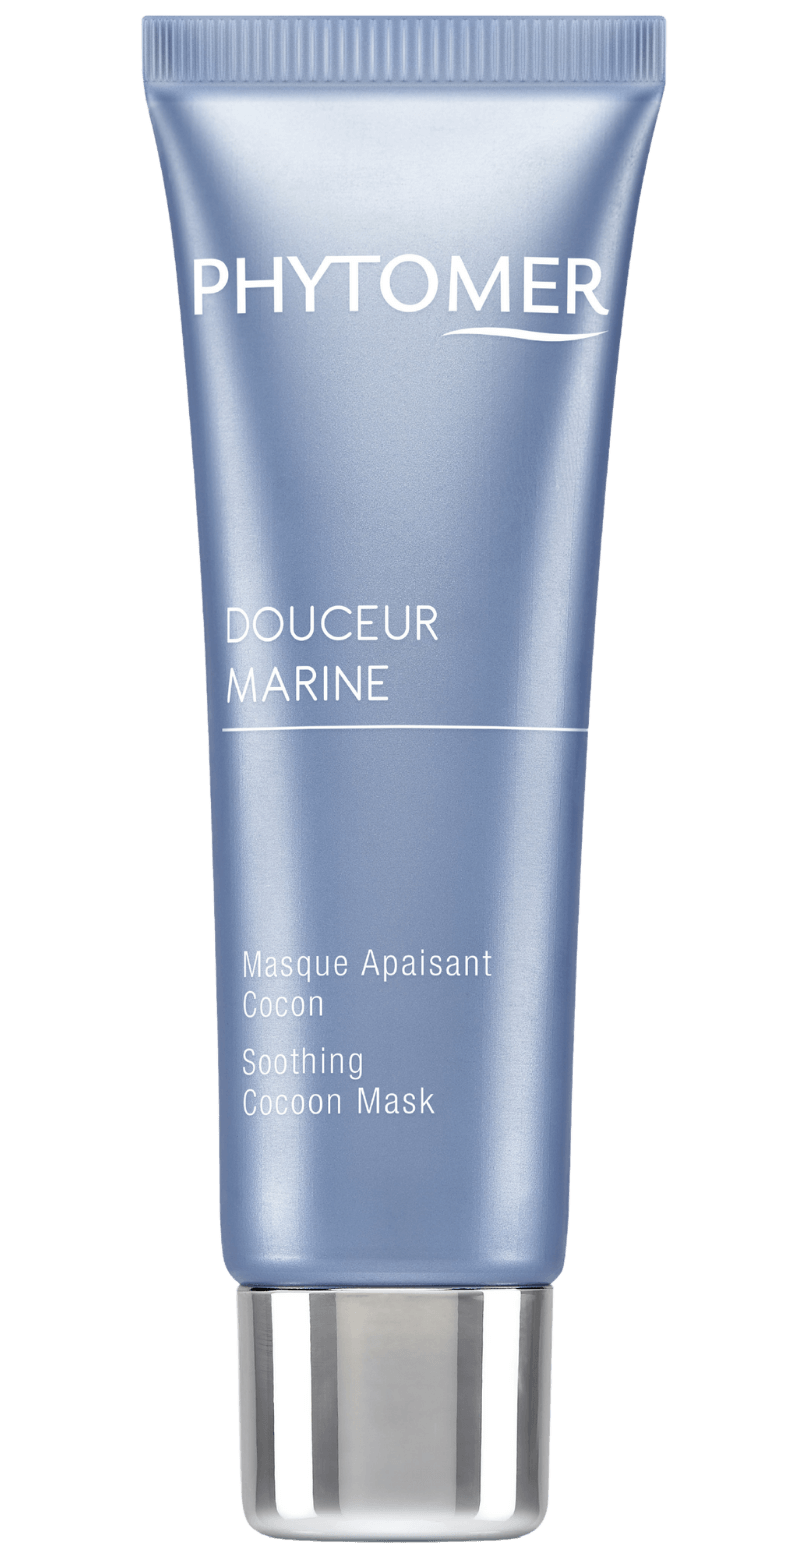 's Phytomer DOUCEUR MARINE Soothing Cocoon Mask - Bellini's Skin and Parfumerie 